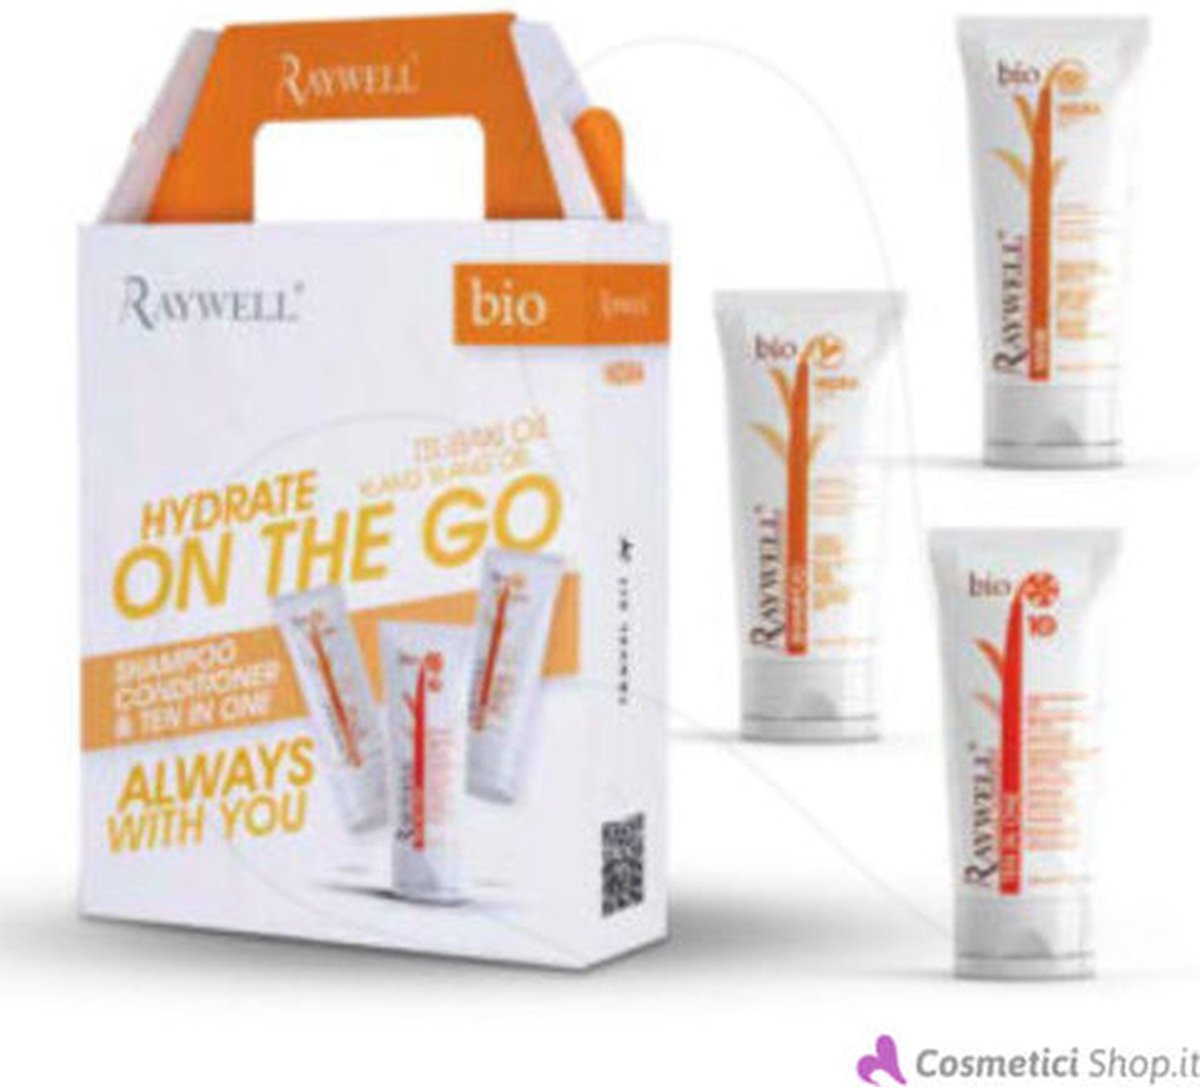 Raywell - Hydrate on the go kit - 3x100ml